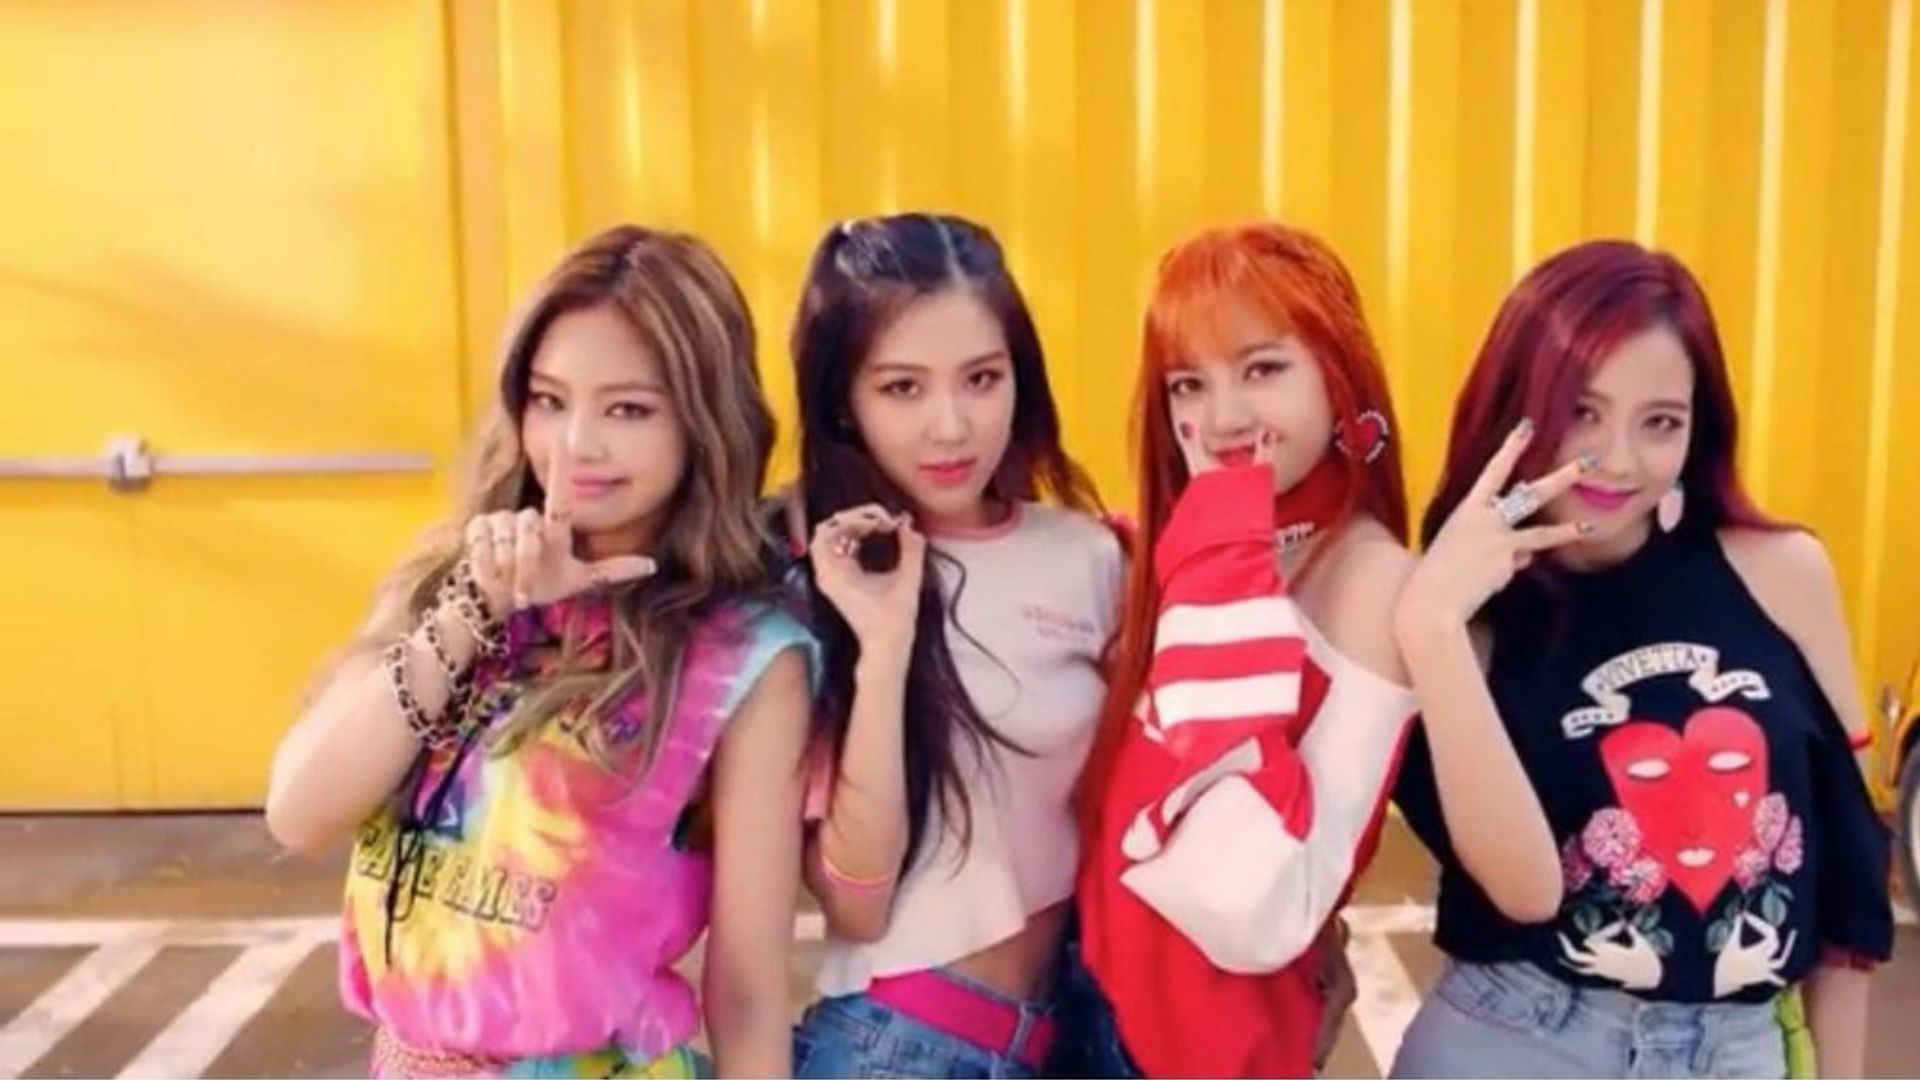 Asian acts to watch out for at Coachella 2023: BLACKPINK, Jackson